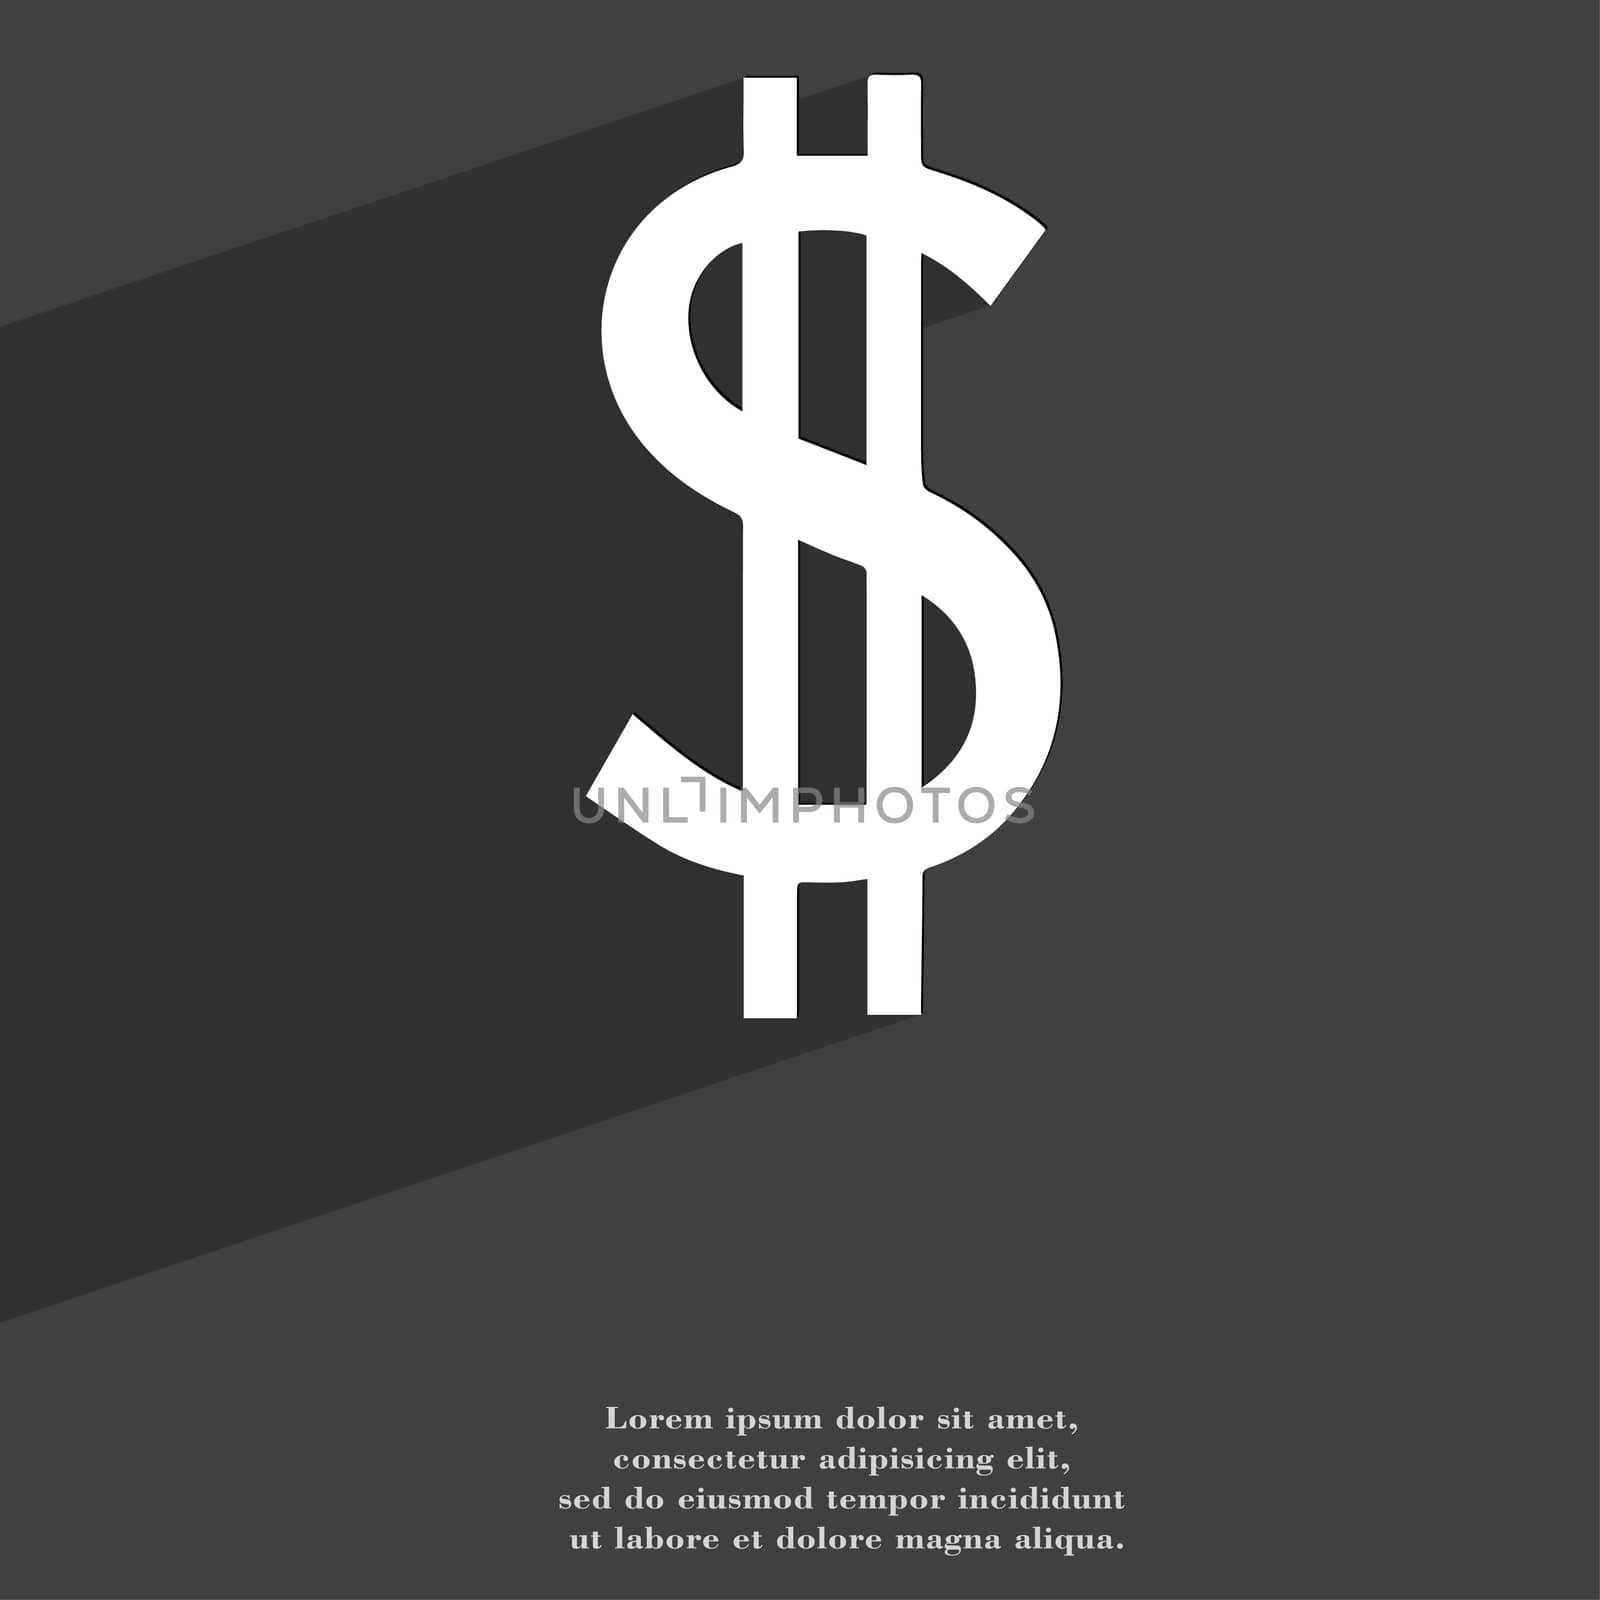 Dollars icon symbol Flat modern web design with long shadow and space for your text. illustration